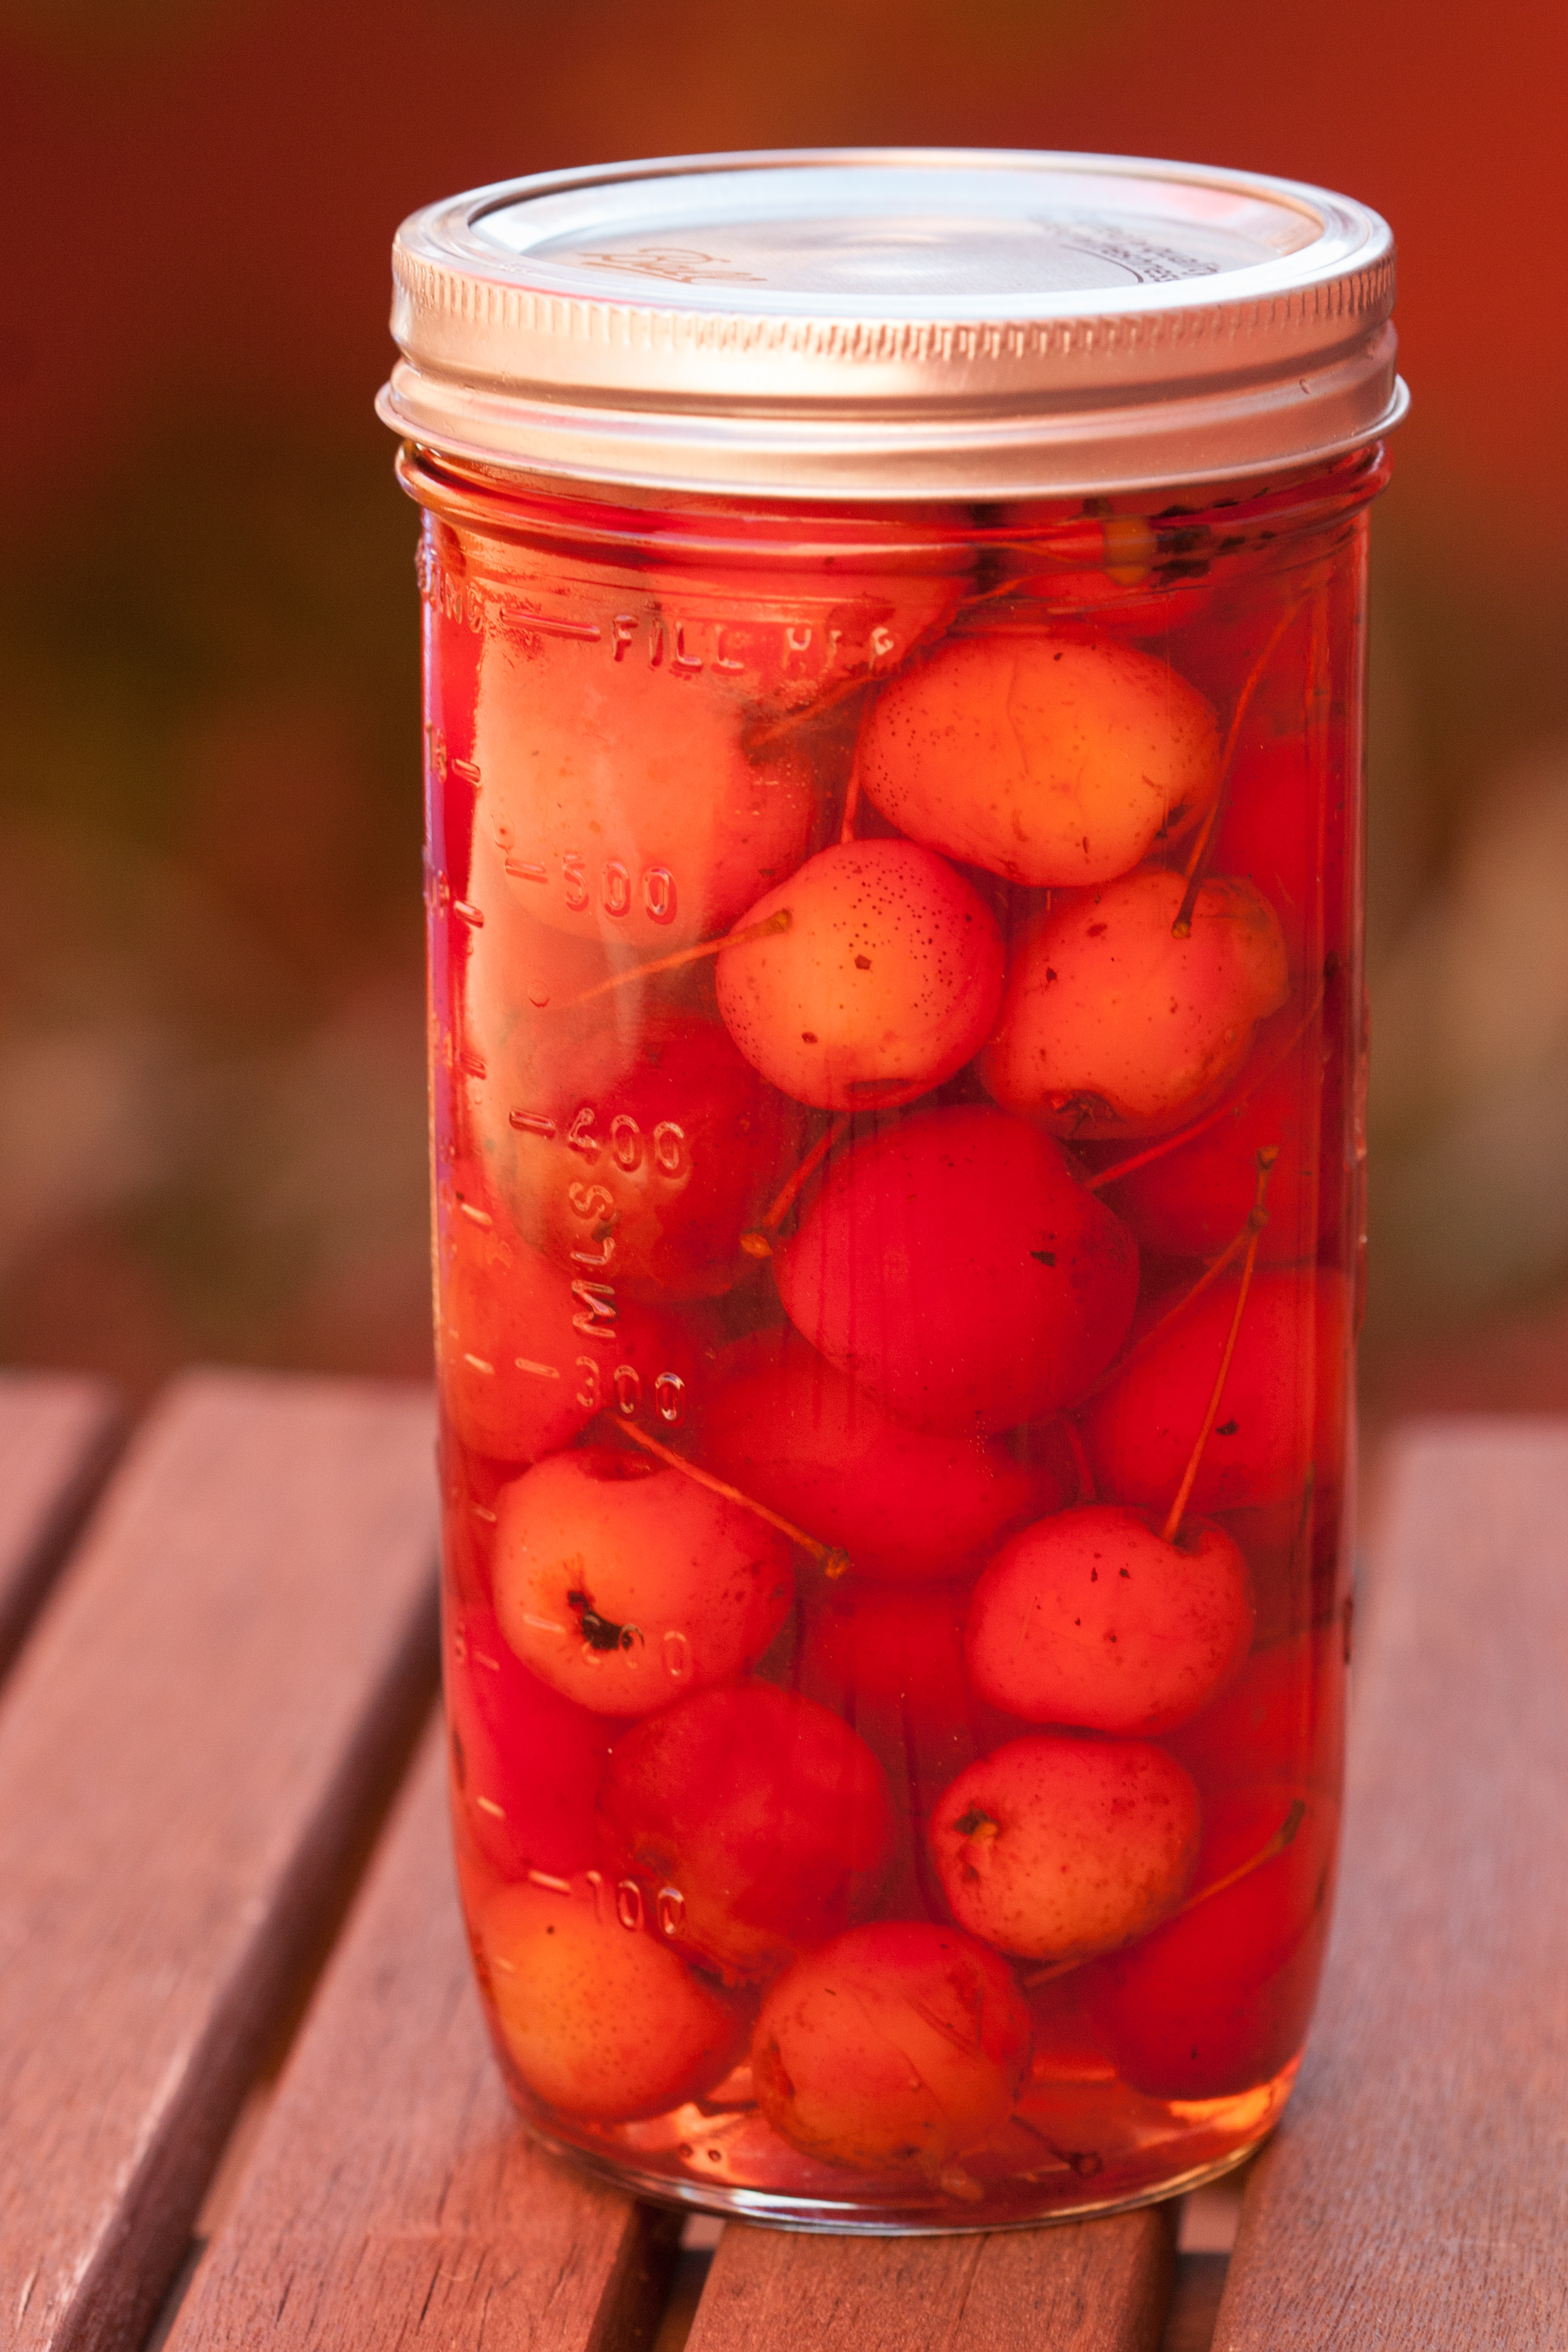 Spiced Crabapple Recipe: an Unusual Fruit Pickle